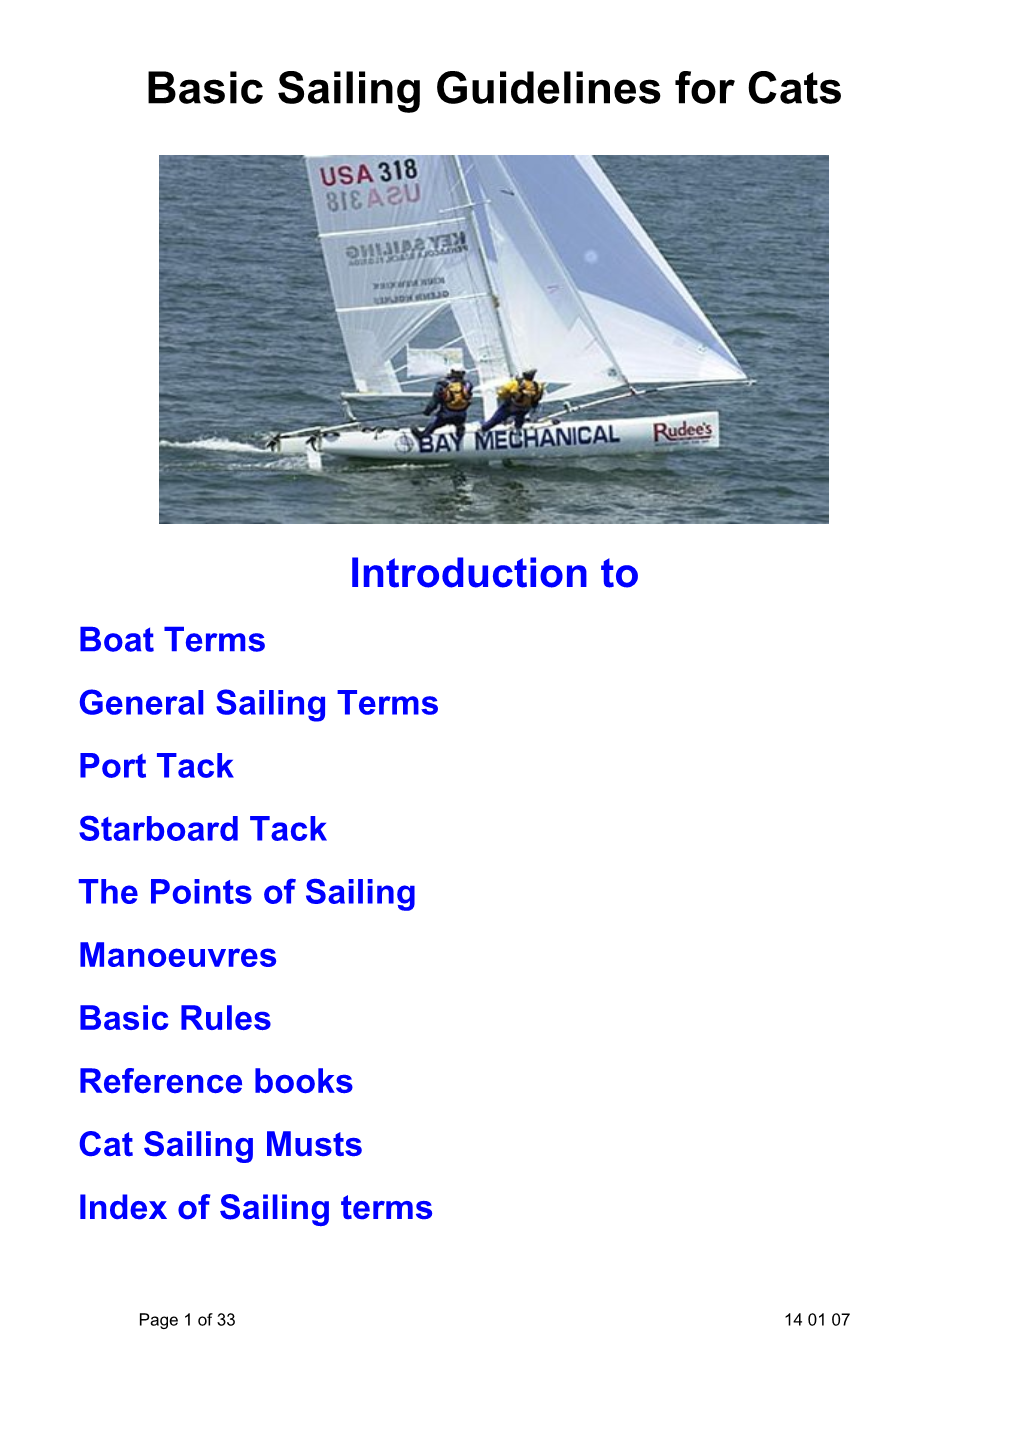 Basic Sailing Guidelines for Cats